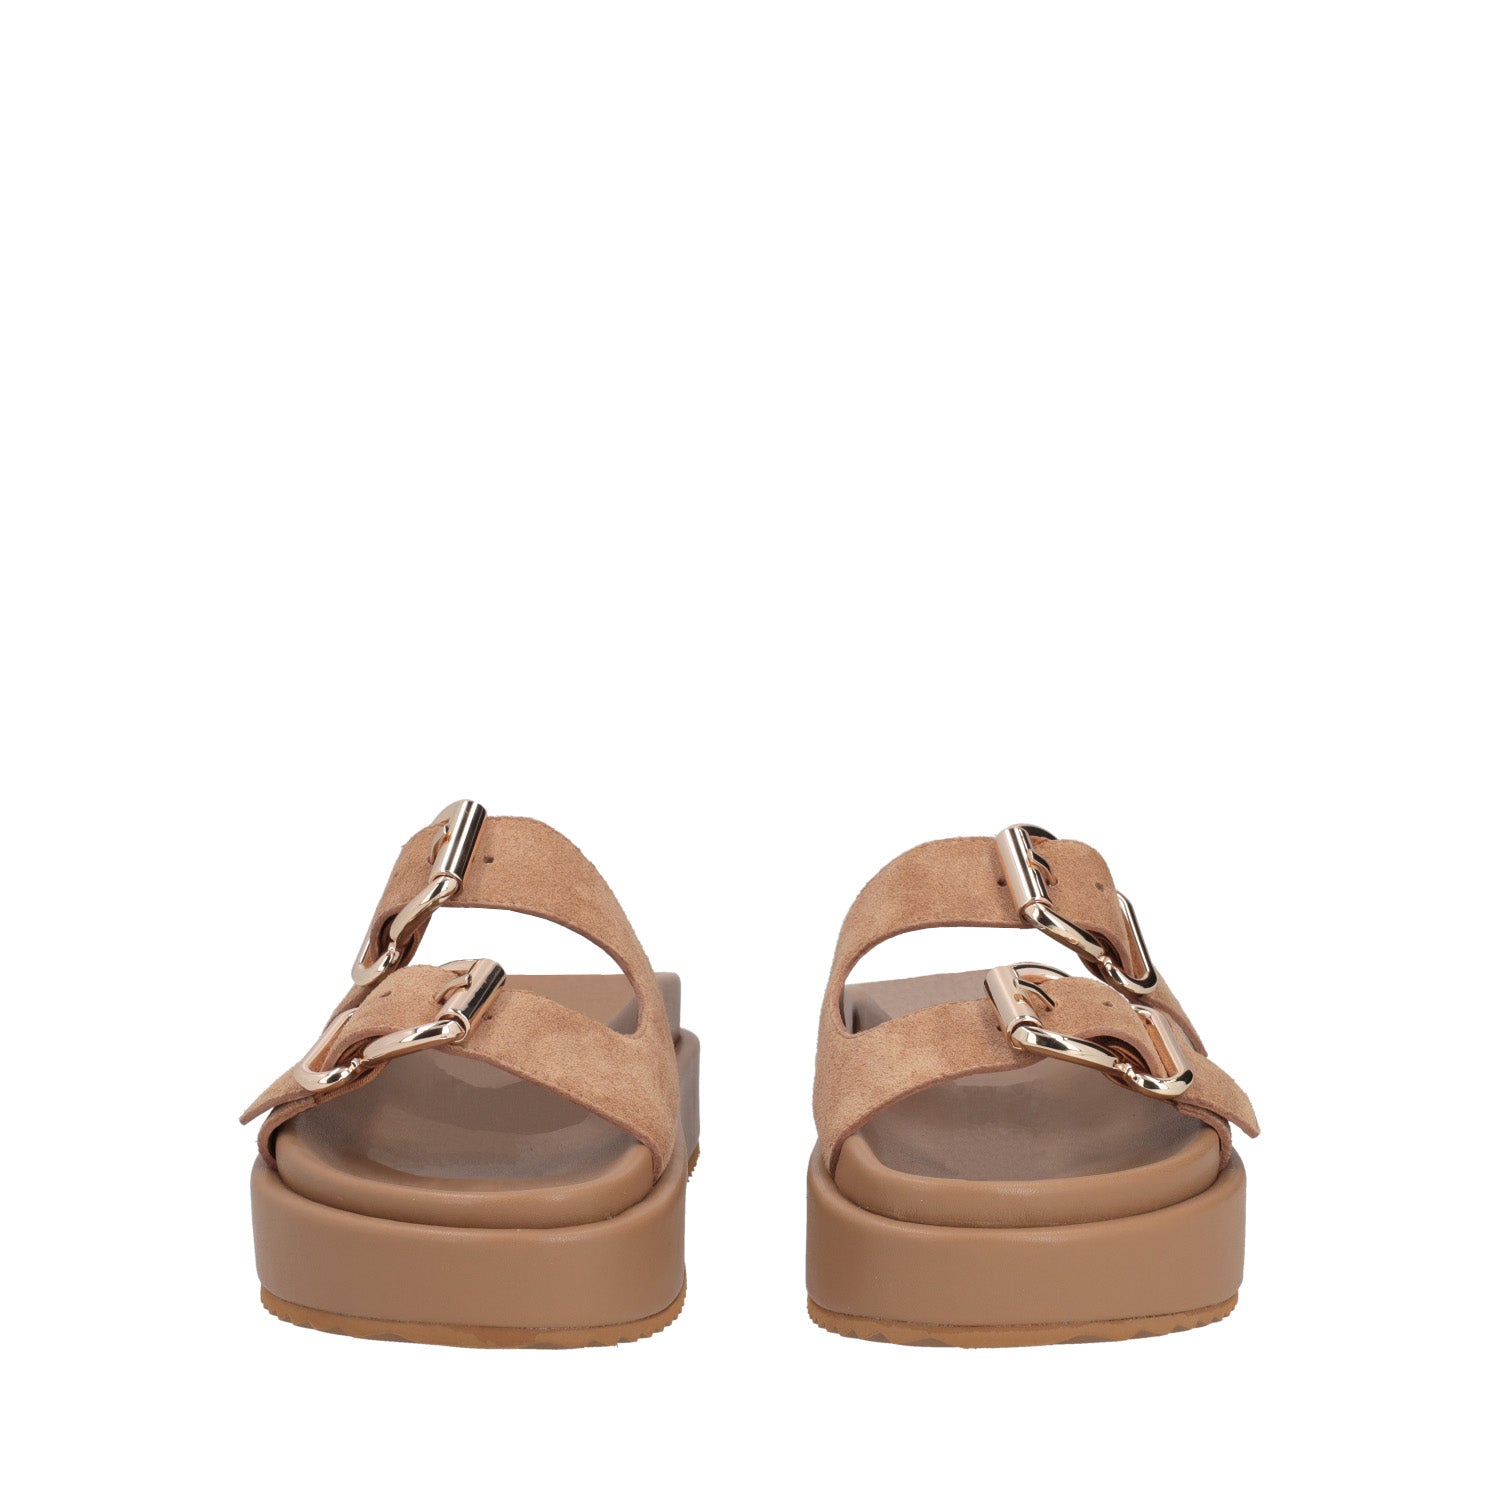 TAN MARGARET SLIPPERS IN SUEDE LEATHER